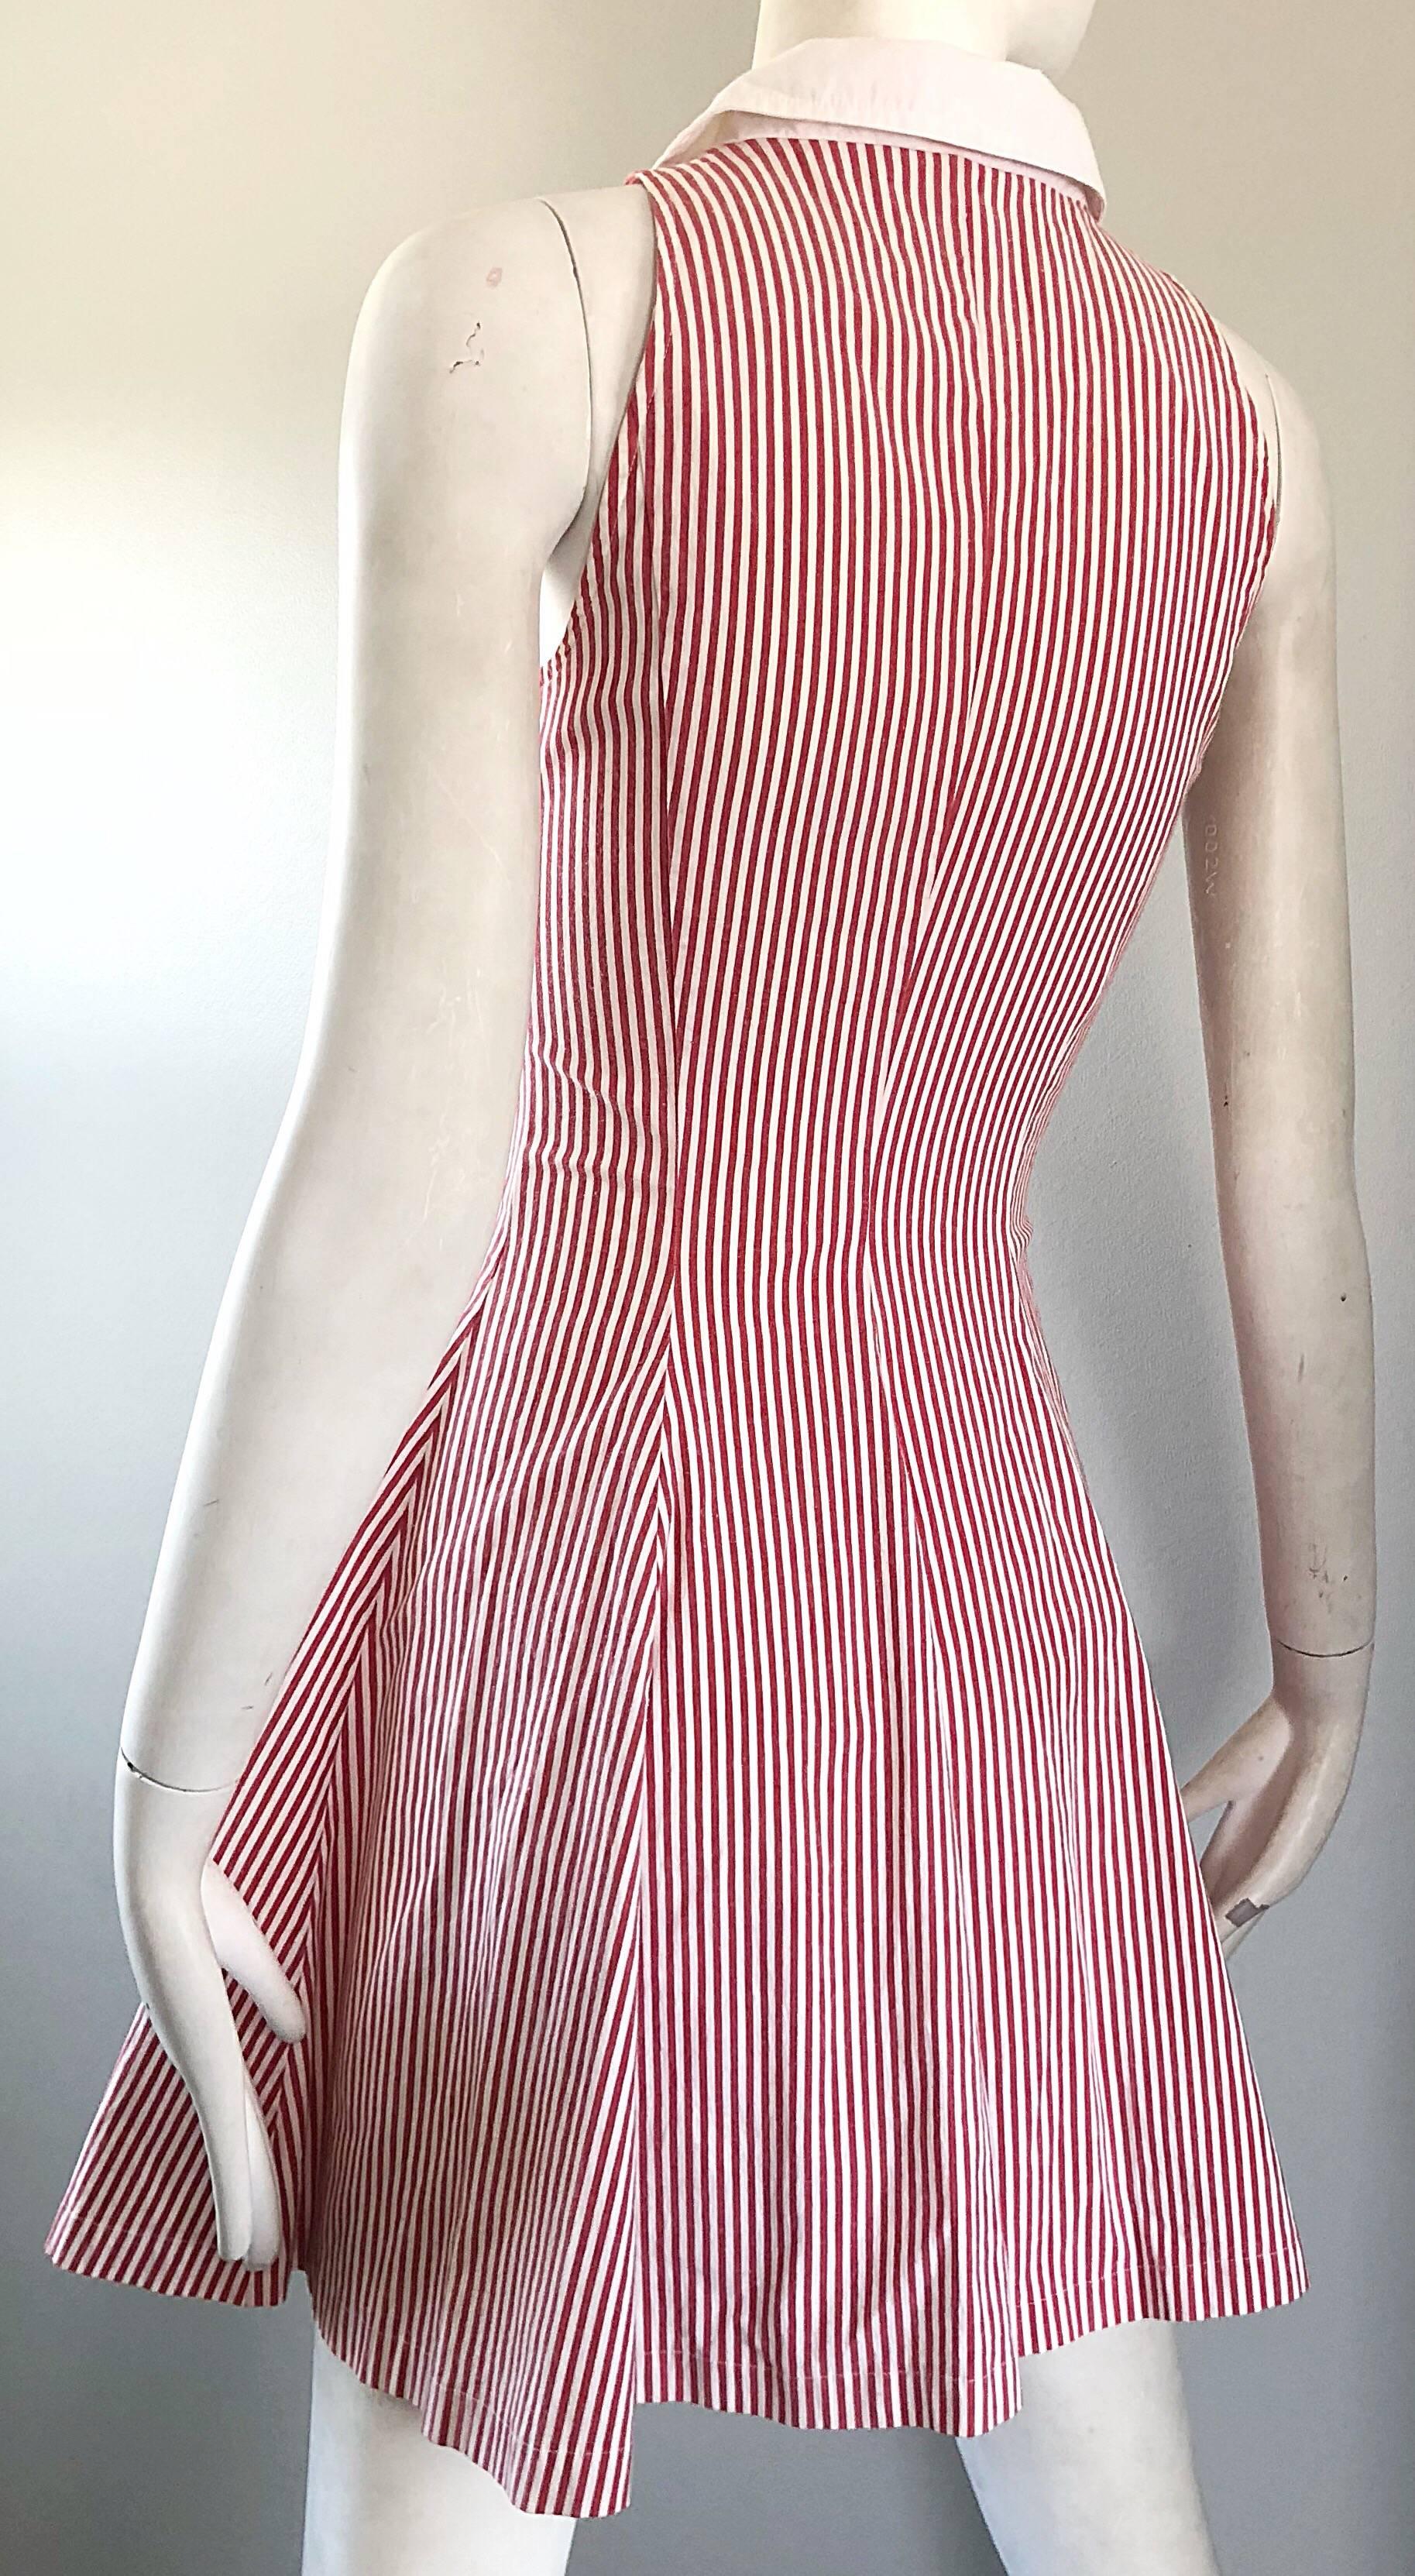 Women's 1980s Angelo Tarlazzi Vintage Red and White Seersucker Nautical Striped Dress  For Sale